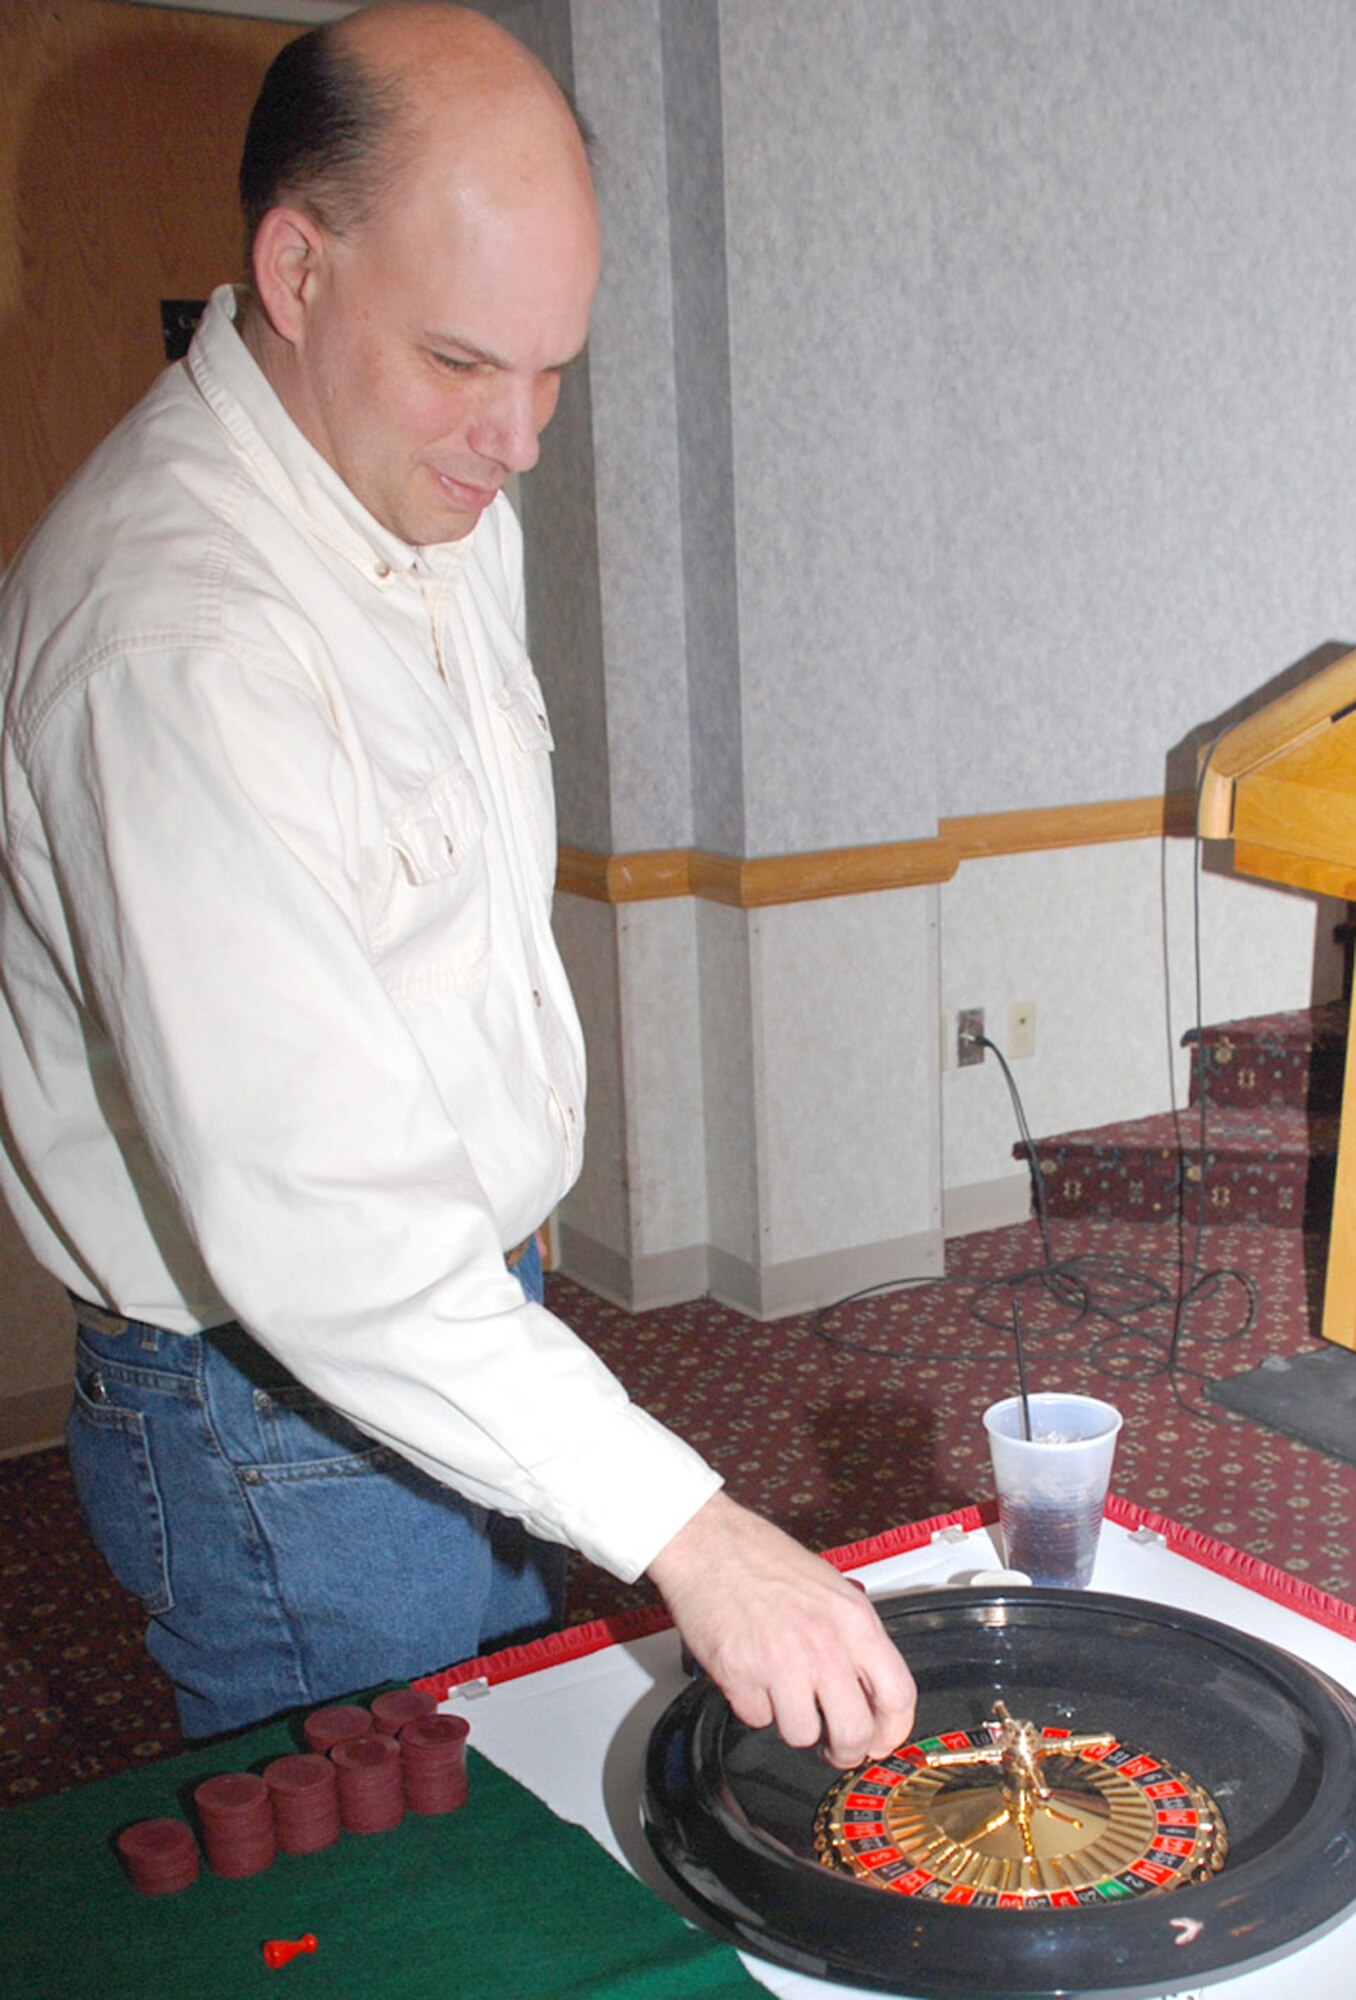 Capt. Andrew Mercer, 90th Operations Support Squadron, plays a game of roulette at the Casino Night in the Trail’s End Club Feb. 8. The Company Grade Officer Council sponsored the event which had more than 50 Warren members attend. Participants of the party used fake money to earn the grand prize: a gaming console (U.S. Air Force photos/2nd Lt. Lisa Meiman).